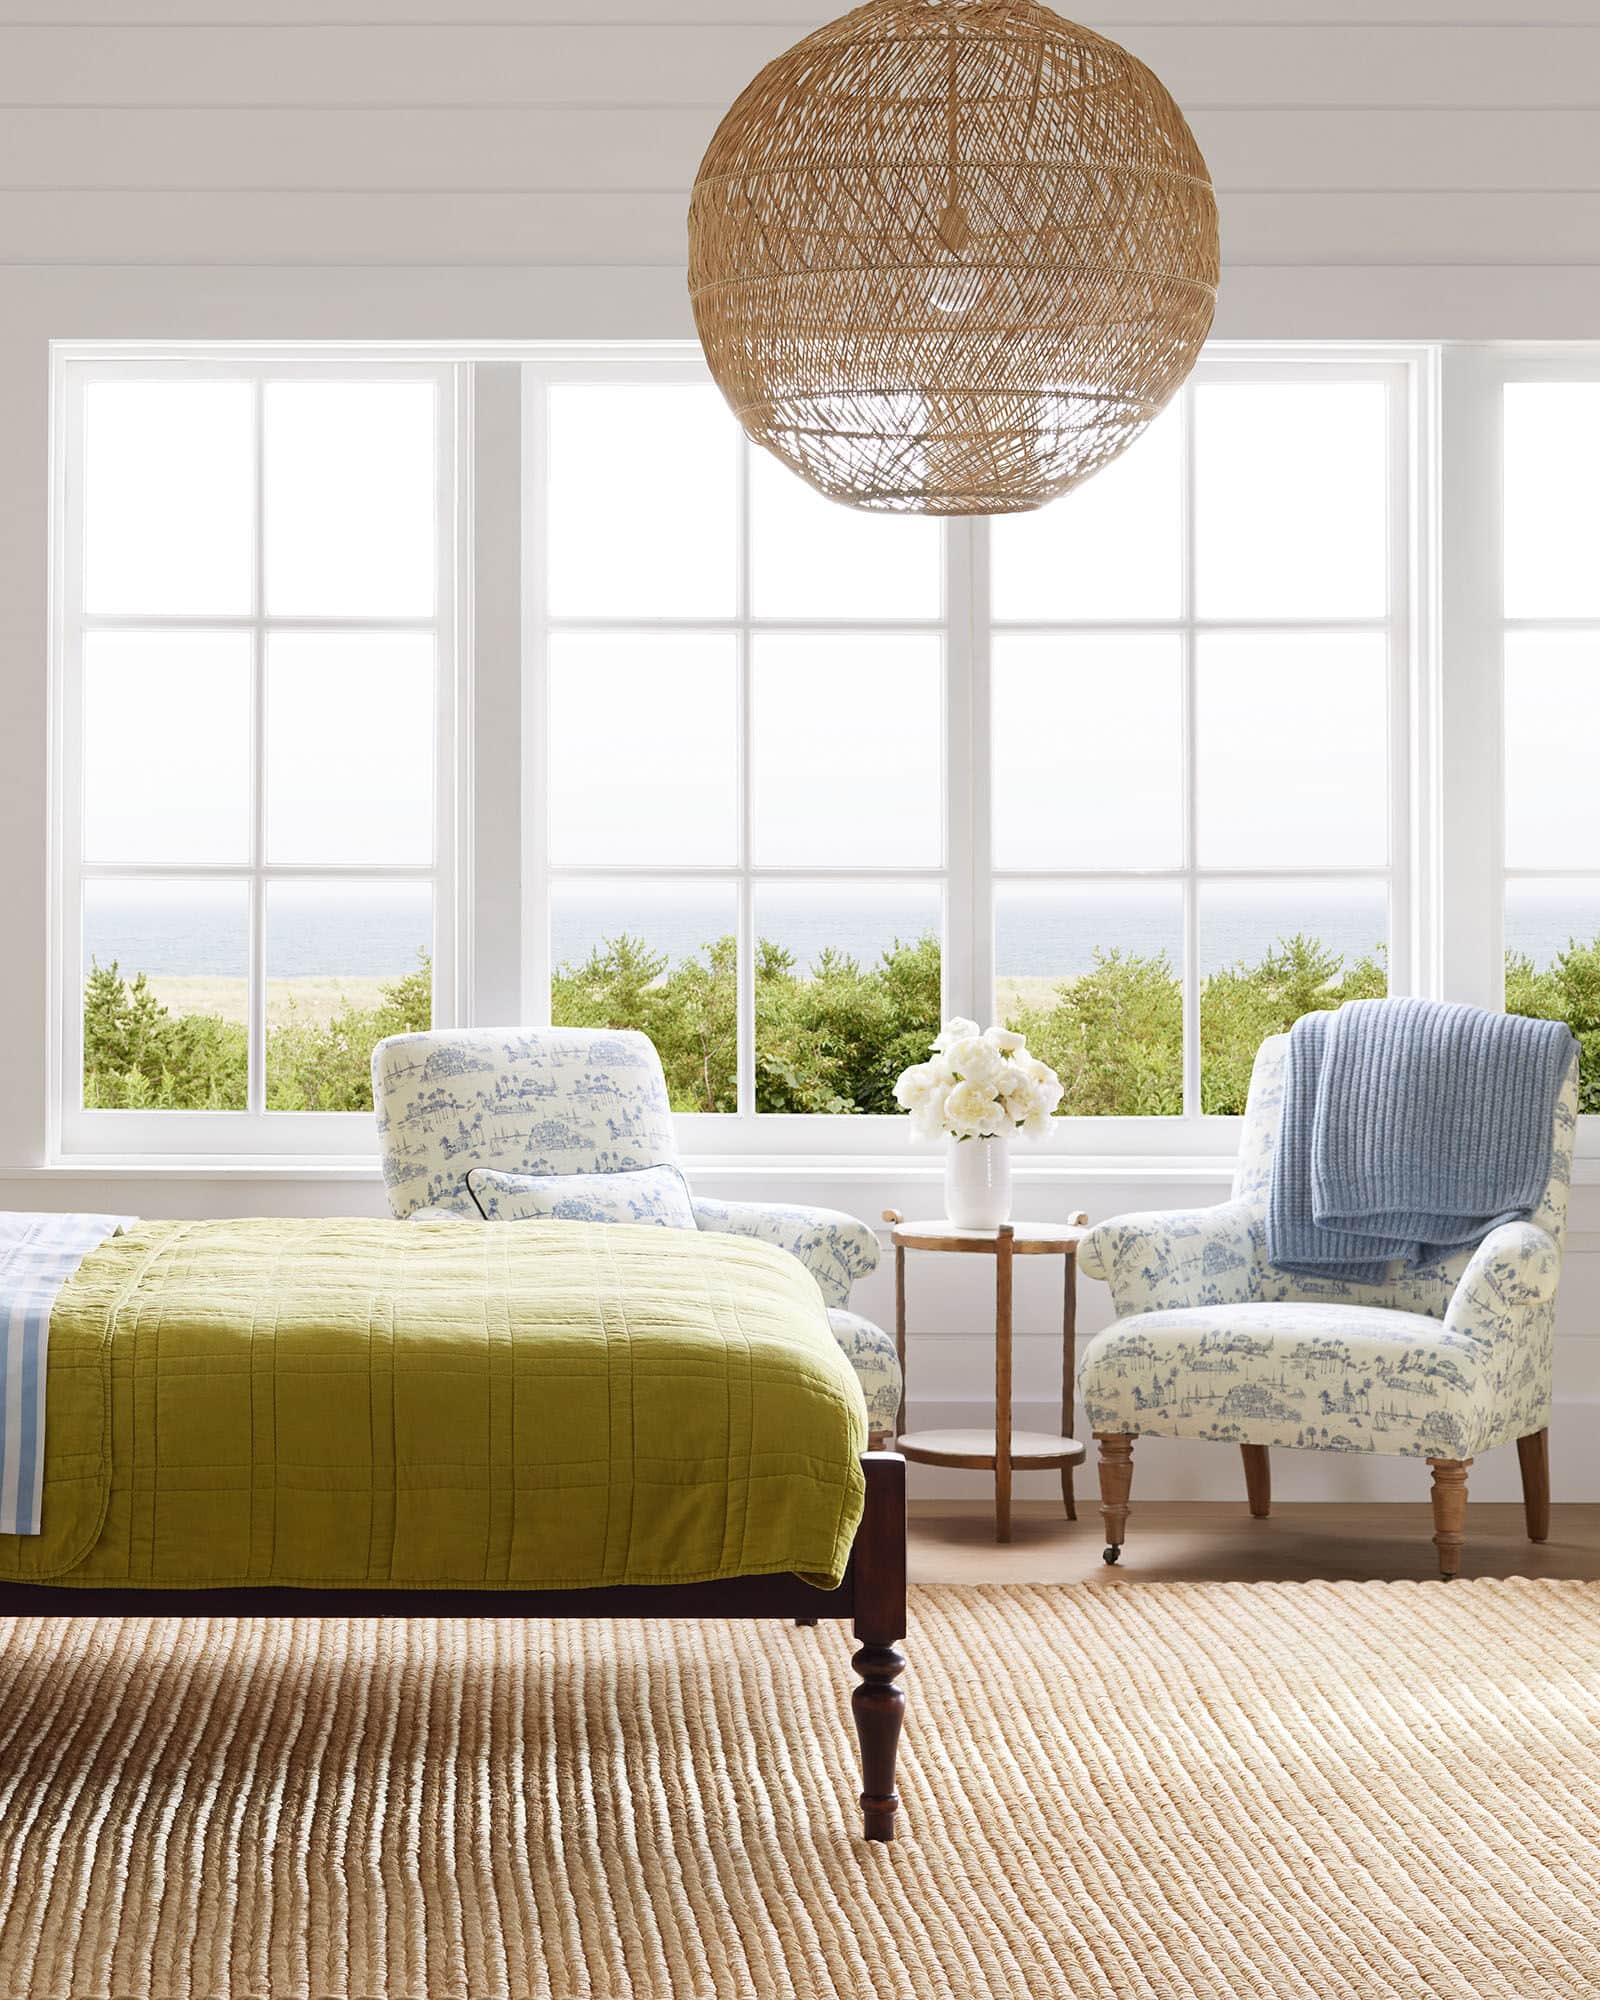 Create a Cheerful Sittting Area by a Window